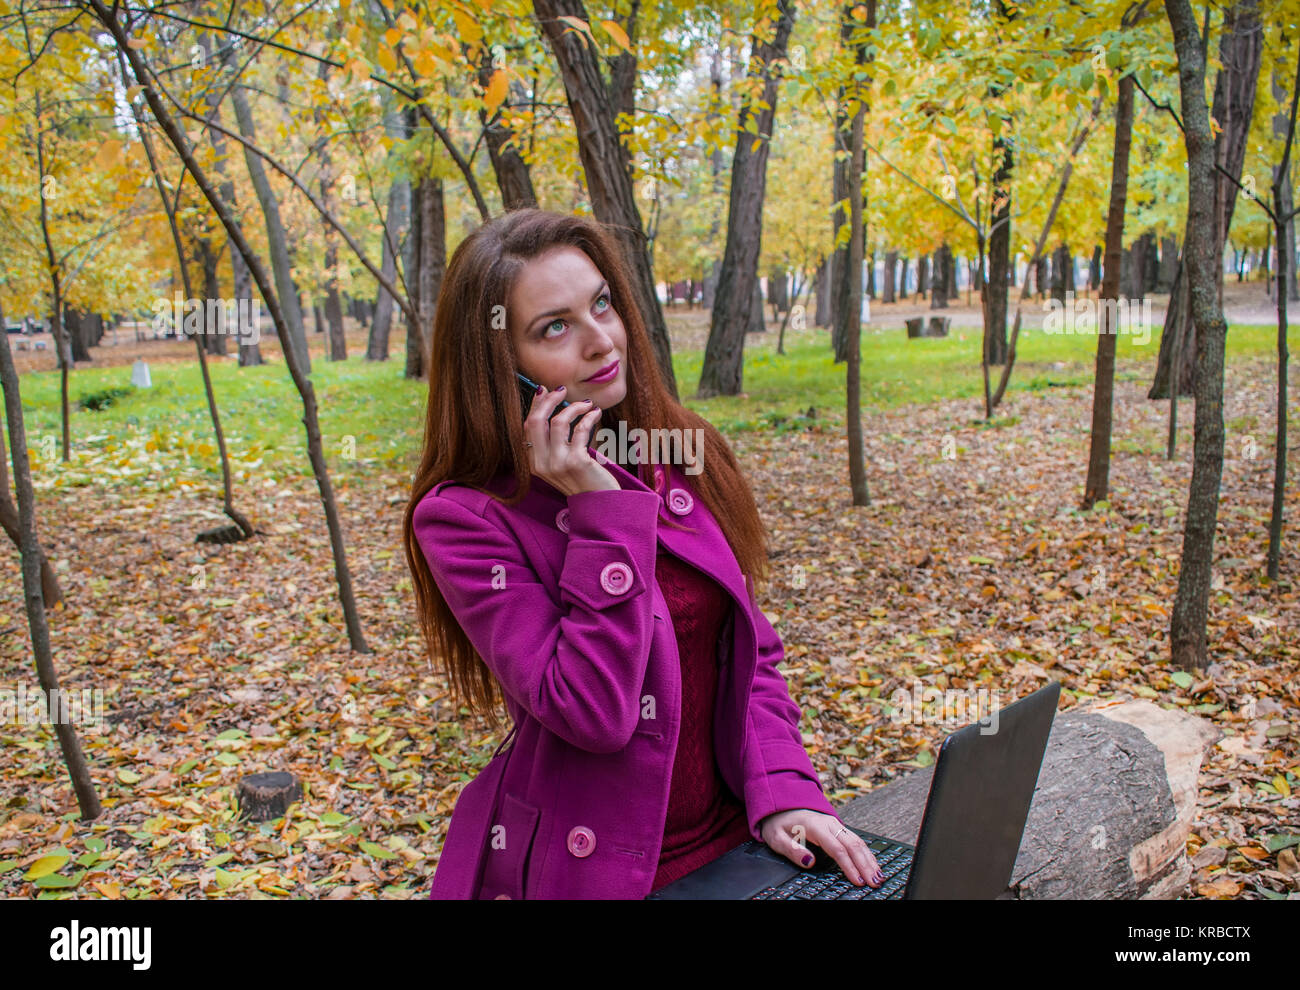 Business woman working with laptop and phone in autumn park. The woman has red hair and big green eyes. Beautiful autumn park Stock Photo